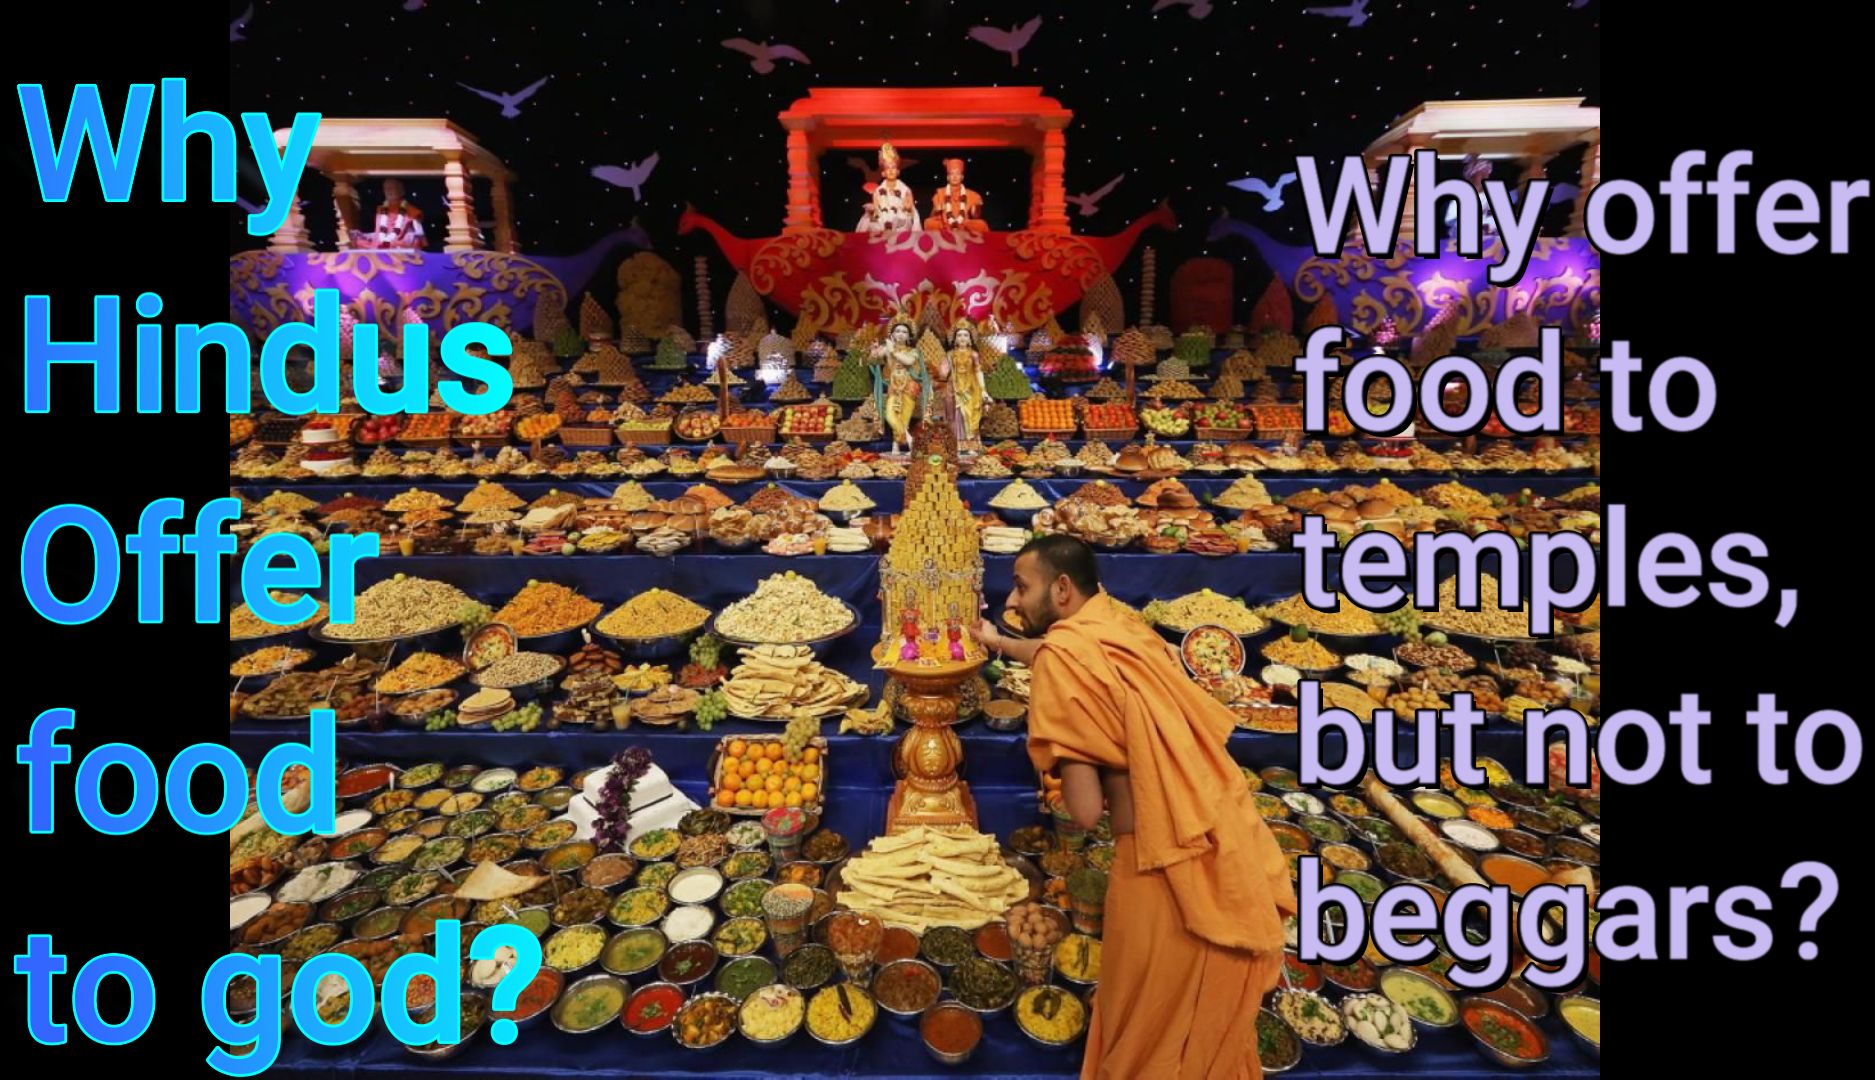 Why Hindus offer food to god